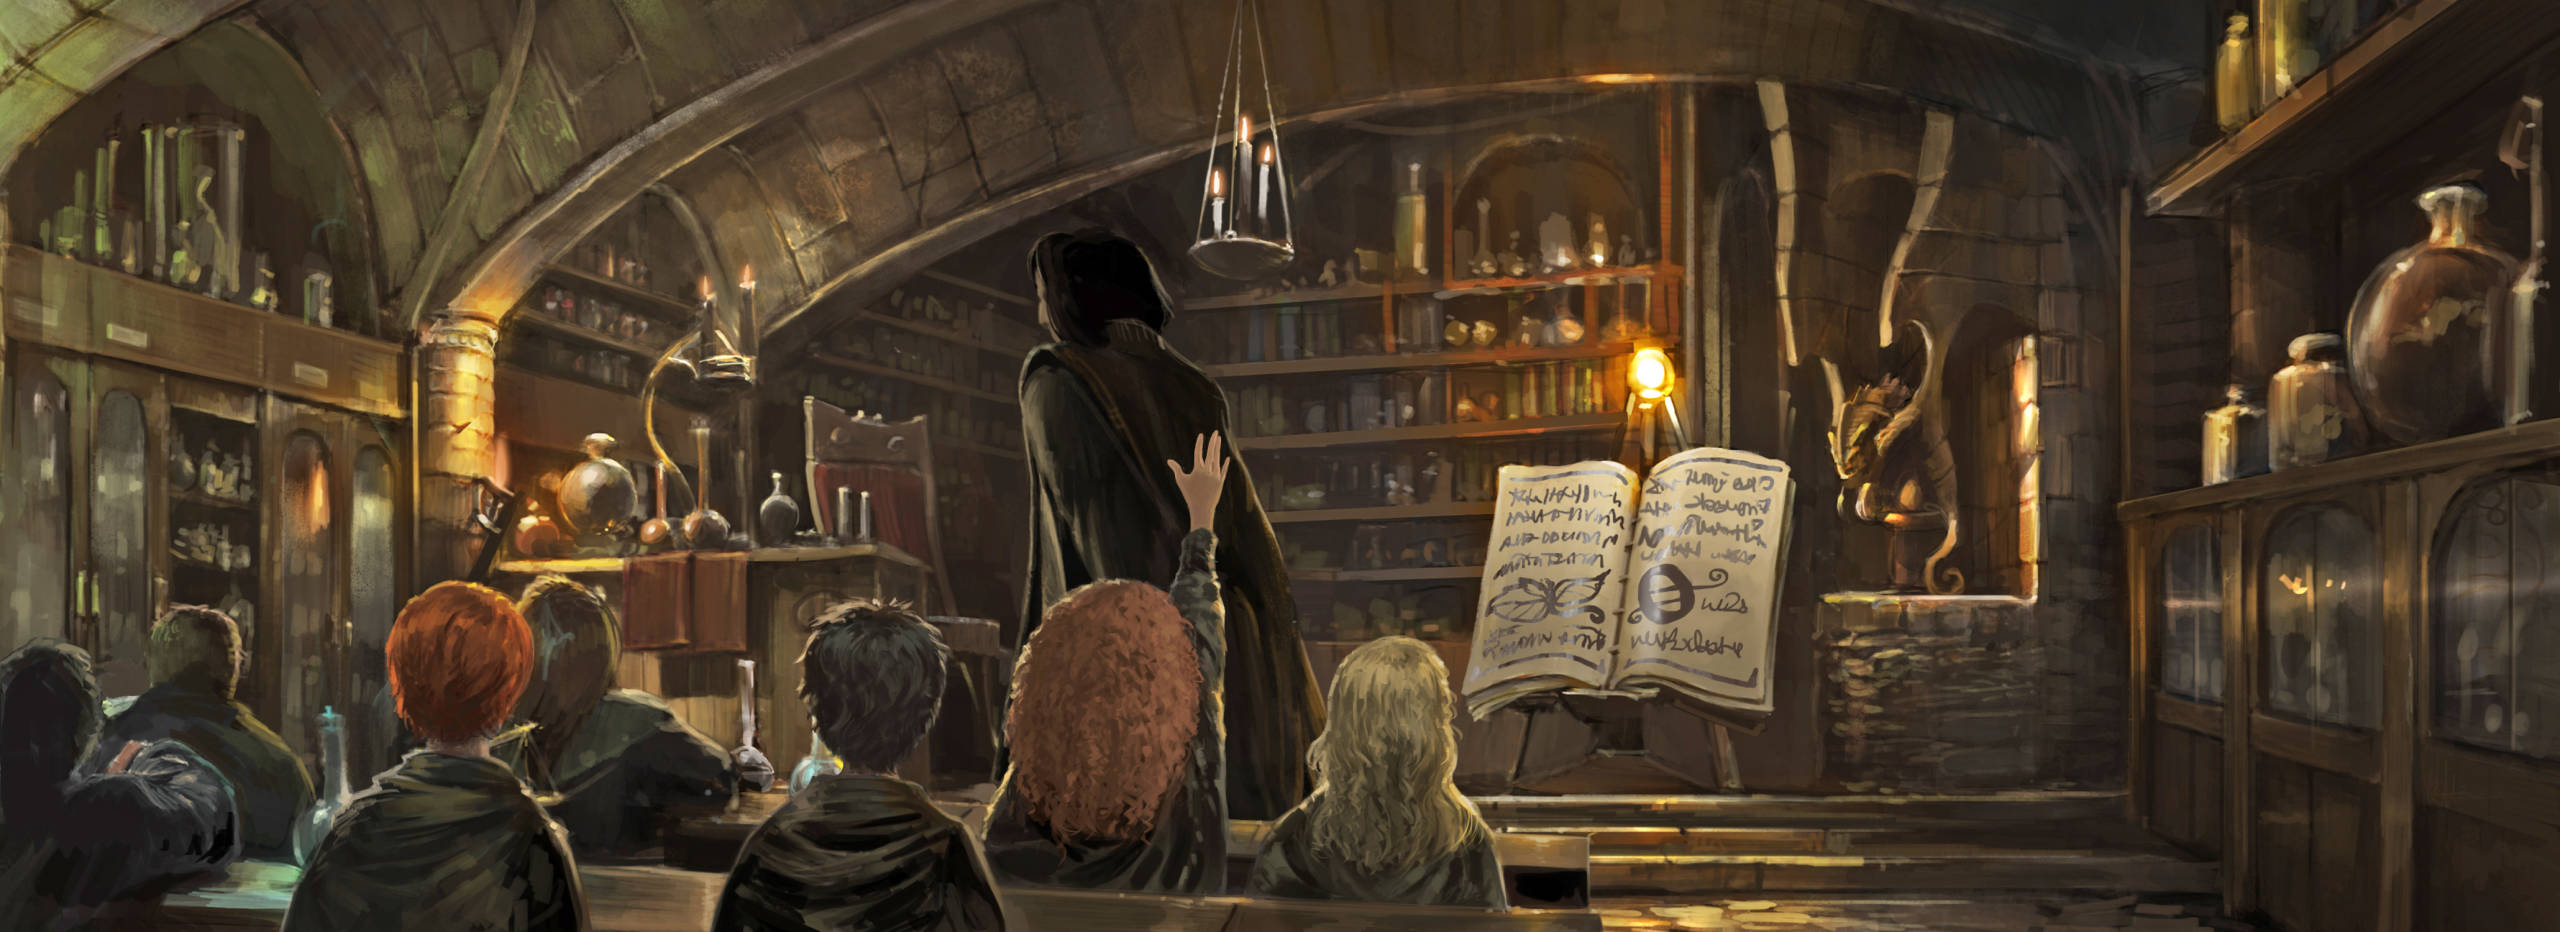 Harry Potter Movies: The Intriguing World of Magical Potions and Spells 2